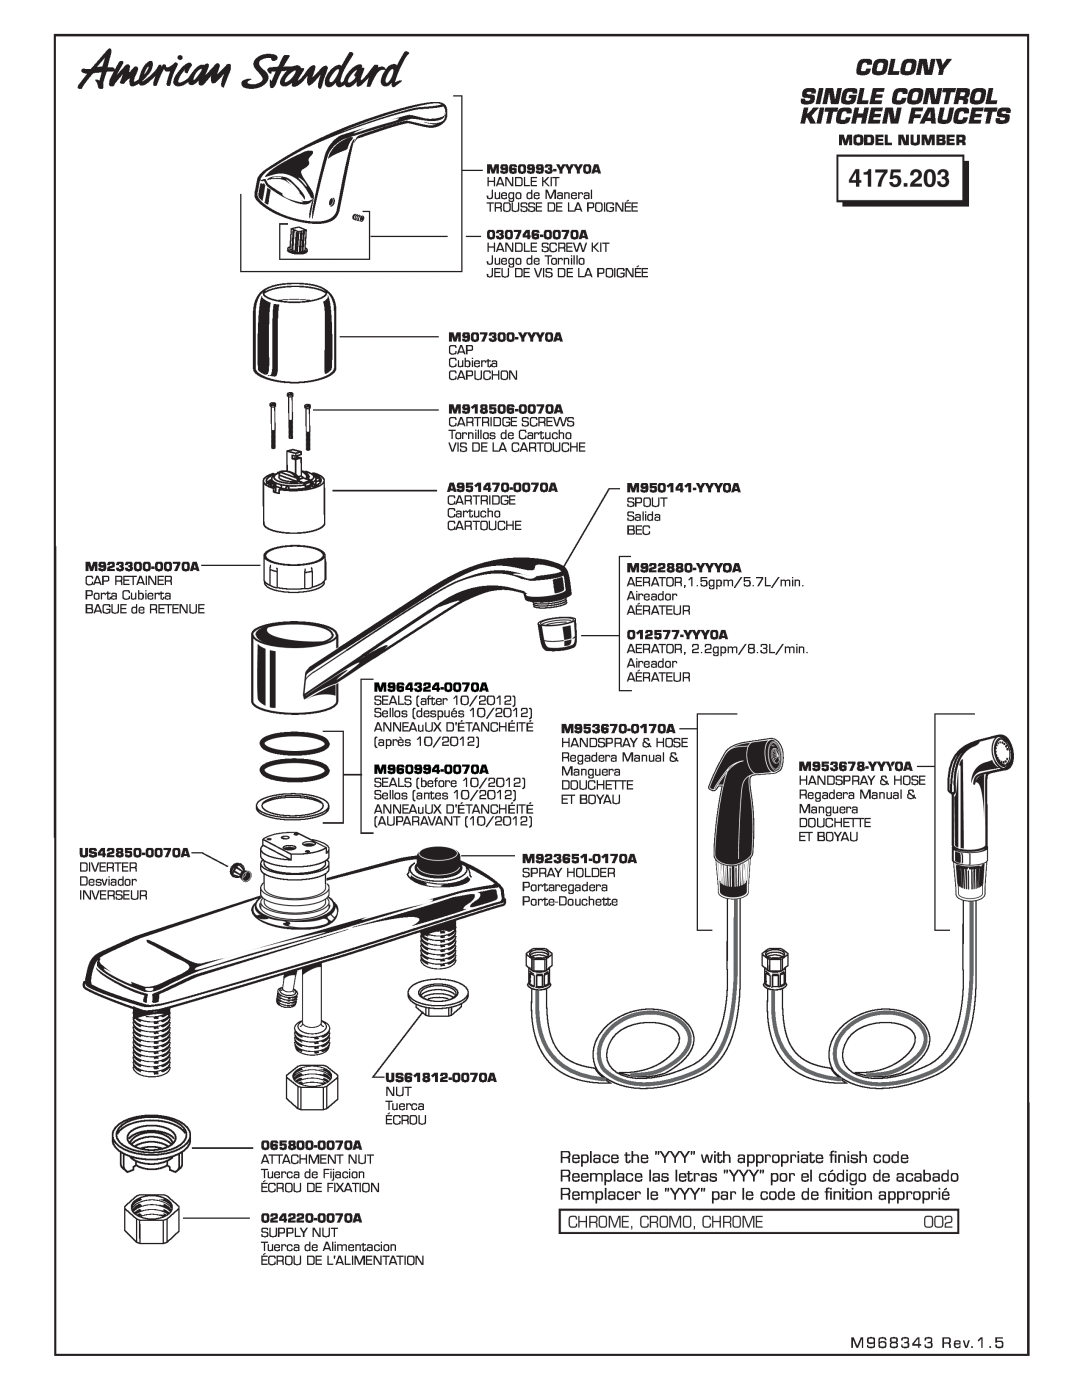 American Standard COLONY SINGLE CONTROL KITCHEN FAUCET Colony, Single Control, Kitchen Faucets, 4175.203, Model Number 